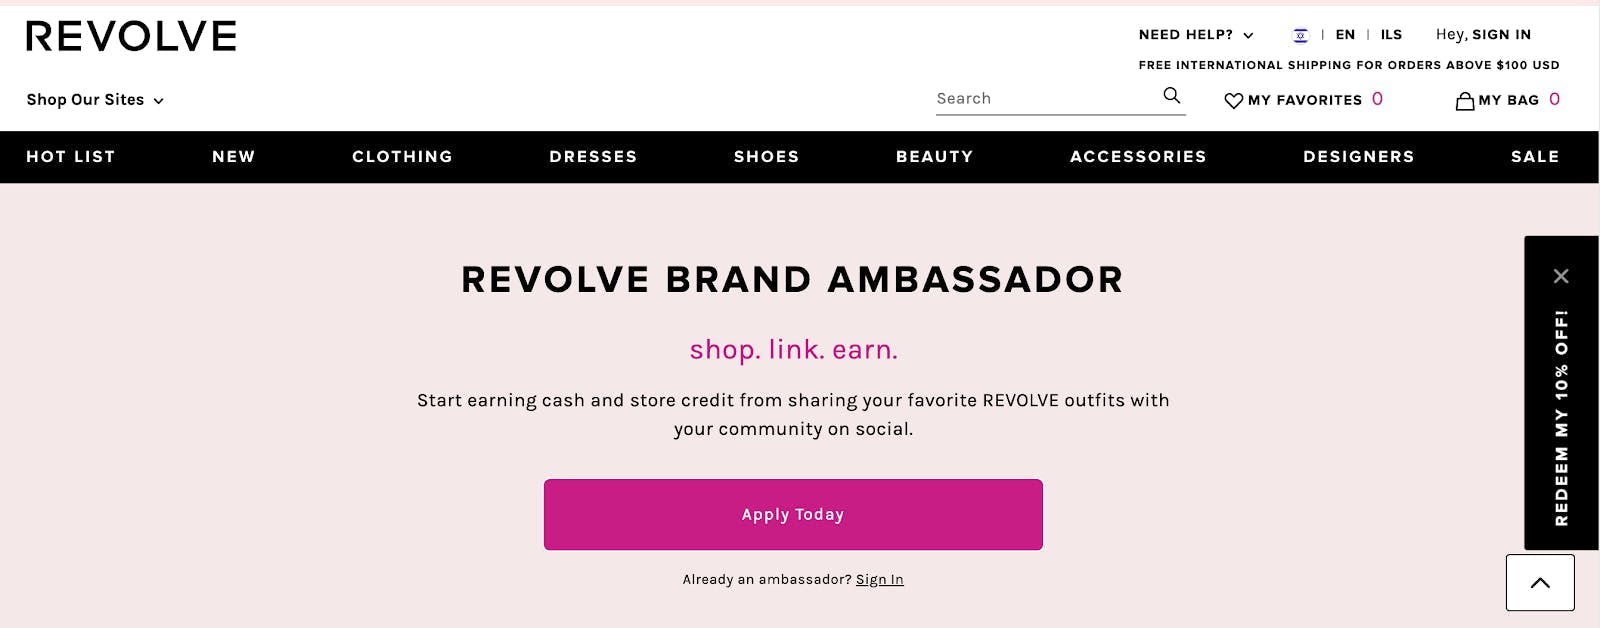 Screenshot from REVOLVE who are looking for brand ambassadors